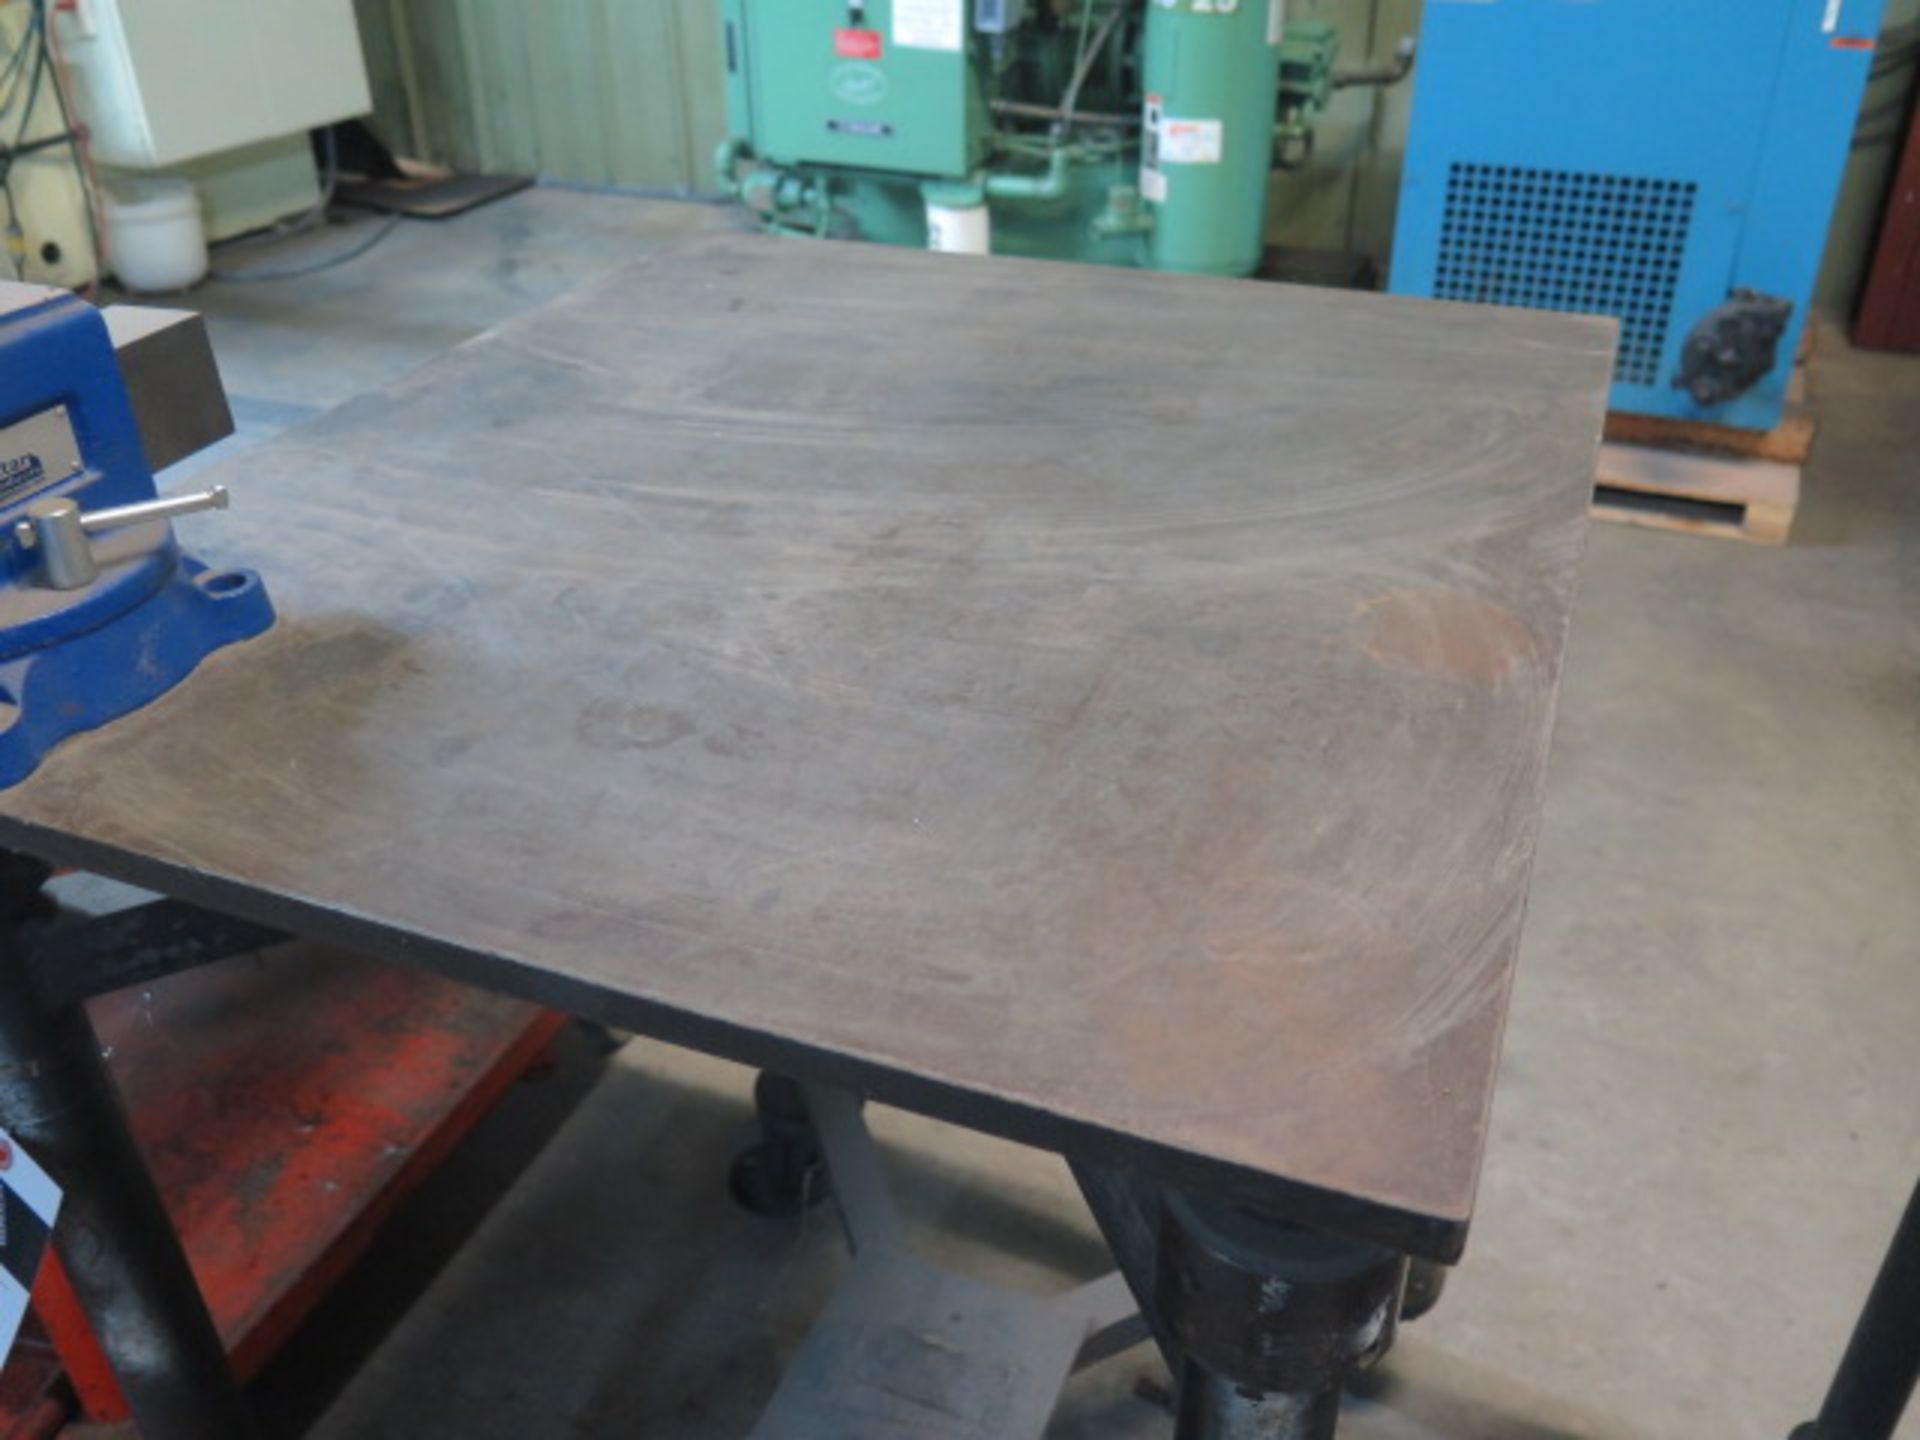 24" x 28" Rolling Steel Table w/ Bench Vise (SOLD AS-IS - NO WARRANTY) - Image 4 of 5